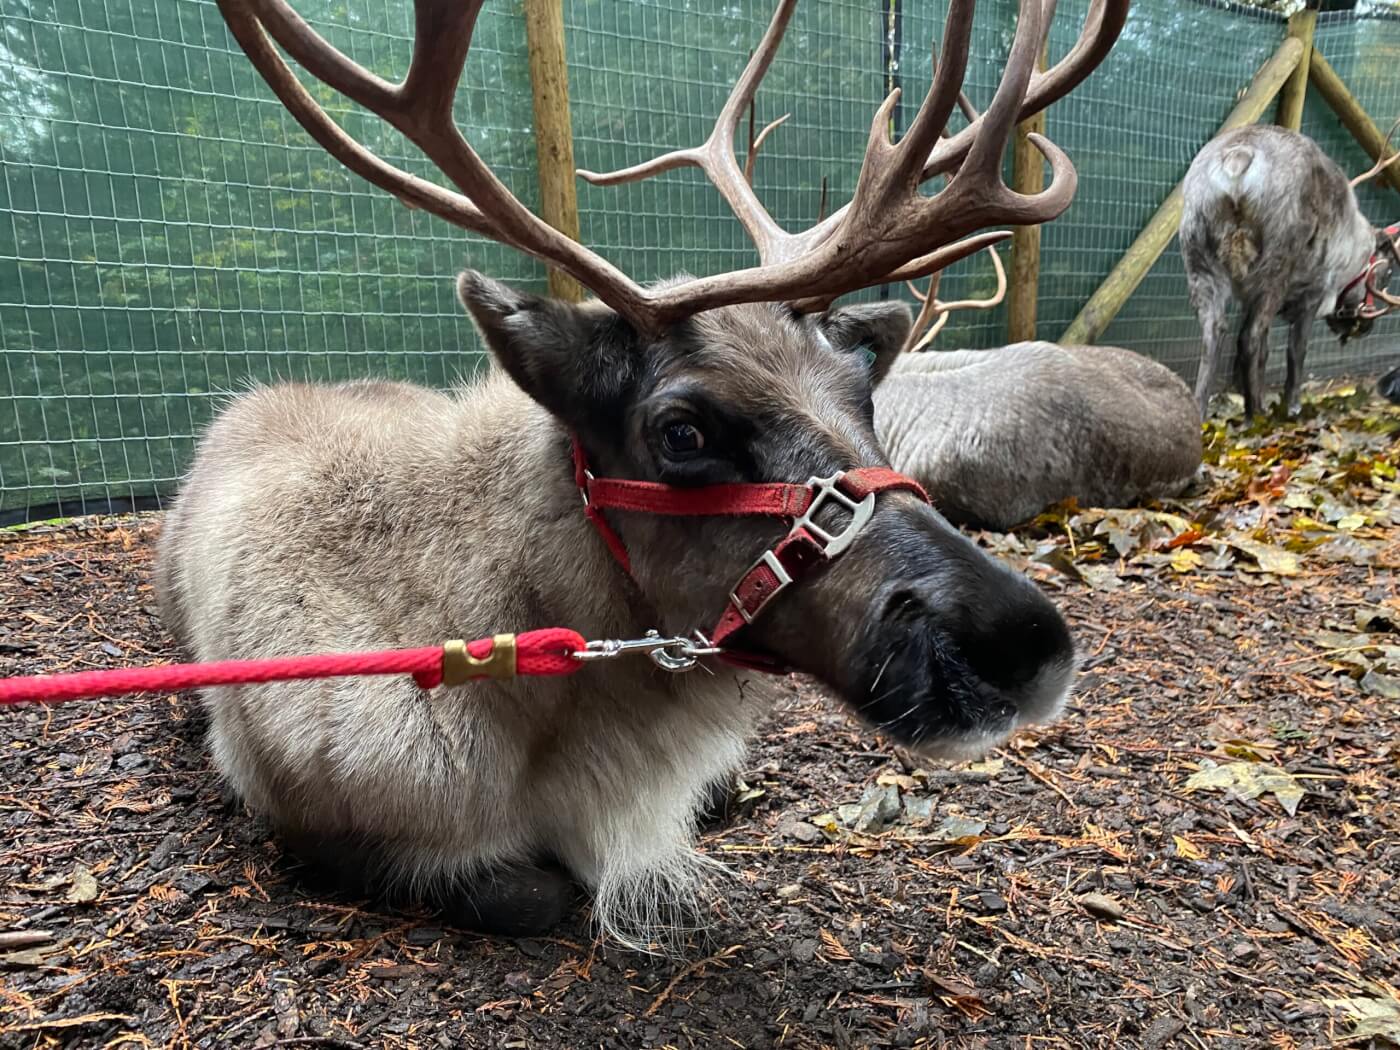 Christmas Events Are Anything but Merry for Reindeer | PETA